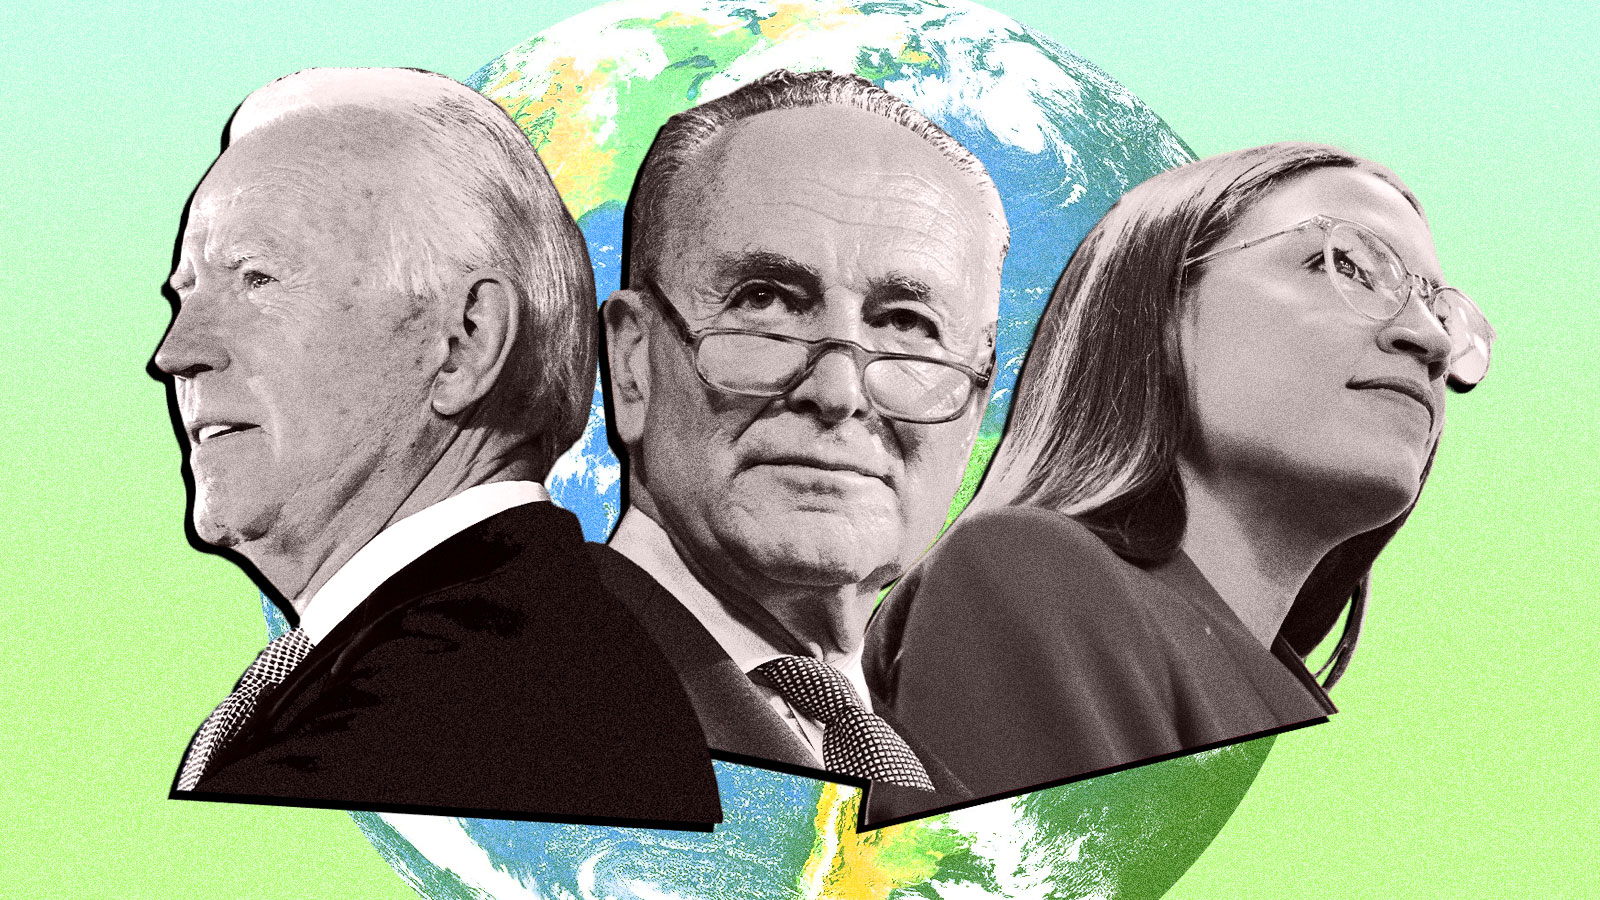 Joe Biden, Chuck Schumer, and Alexandria Ocasio-Cortez are among those pushing for climate plans that may require getting rid of the filibuster.